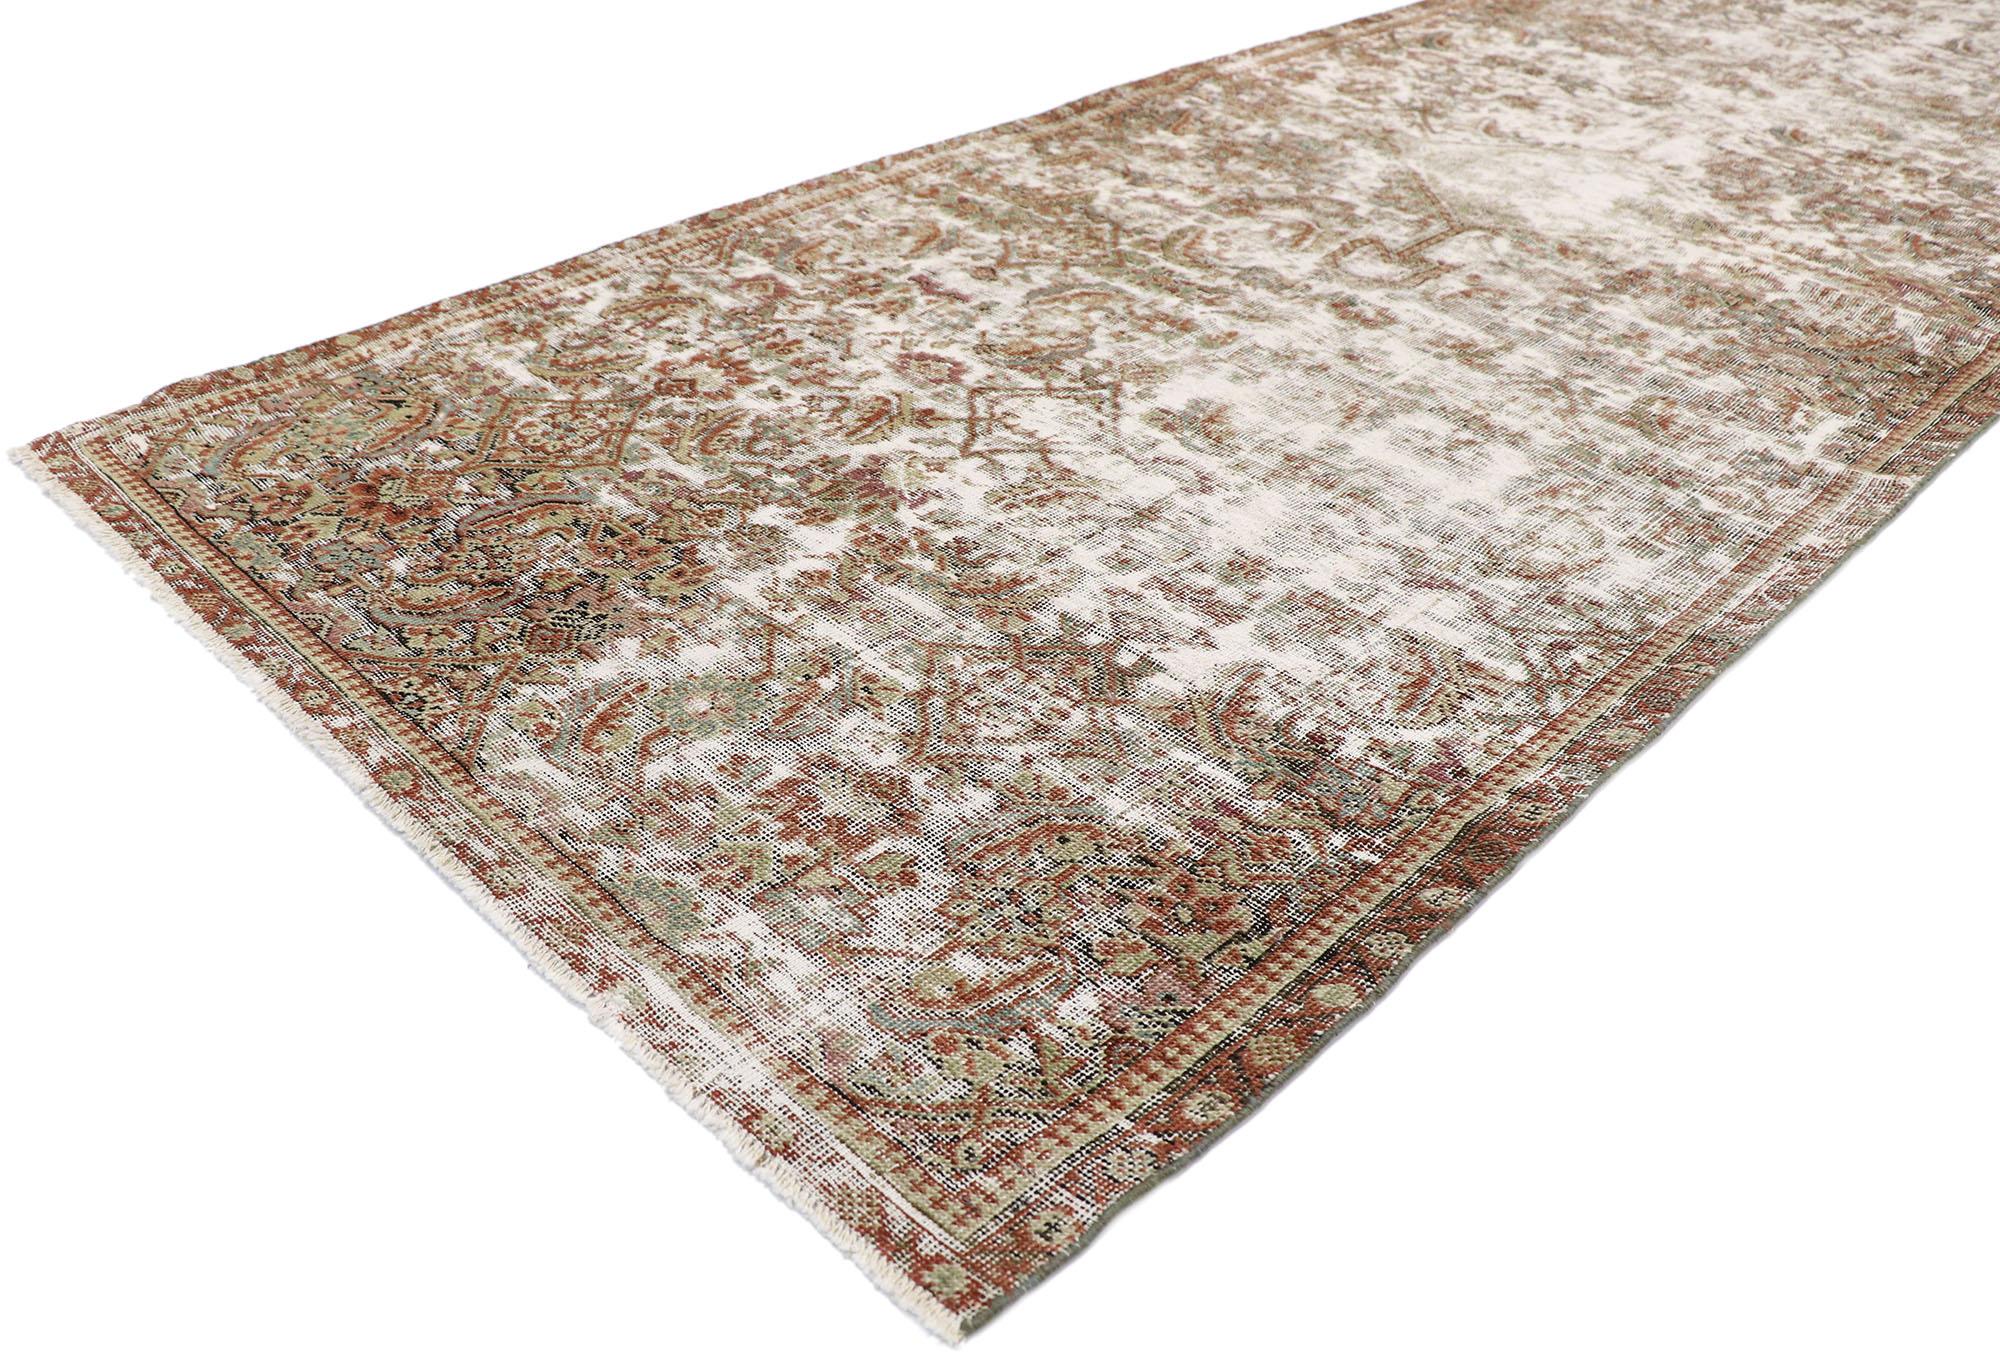 60822, distressed antique Persian Mahal runner with modern rustic industrial style 03'08 x 09'11. Warm and inviting with rustic sensibility, this hand-knotted wool distressed antique Persian Mahal runner beautifully embodies modern industrial style.